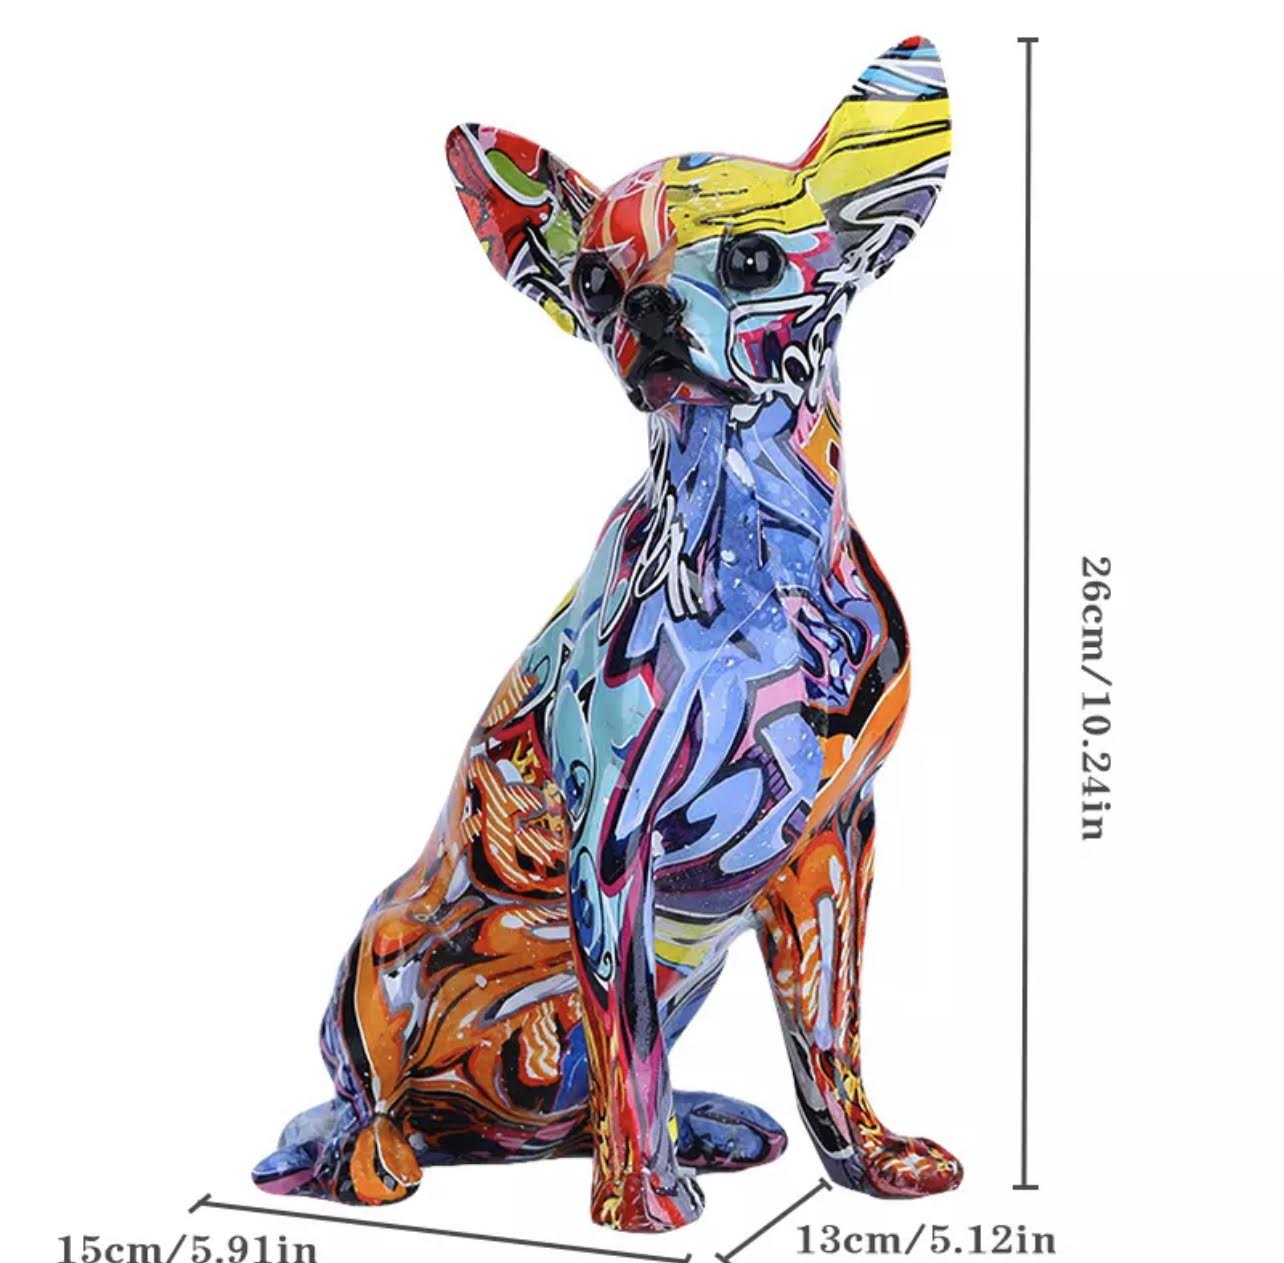 The Chihuahua Sculpture